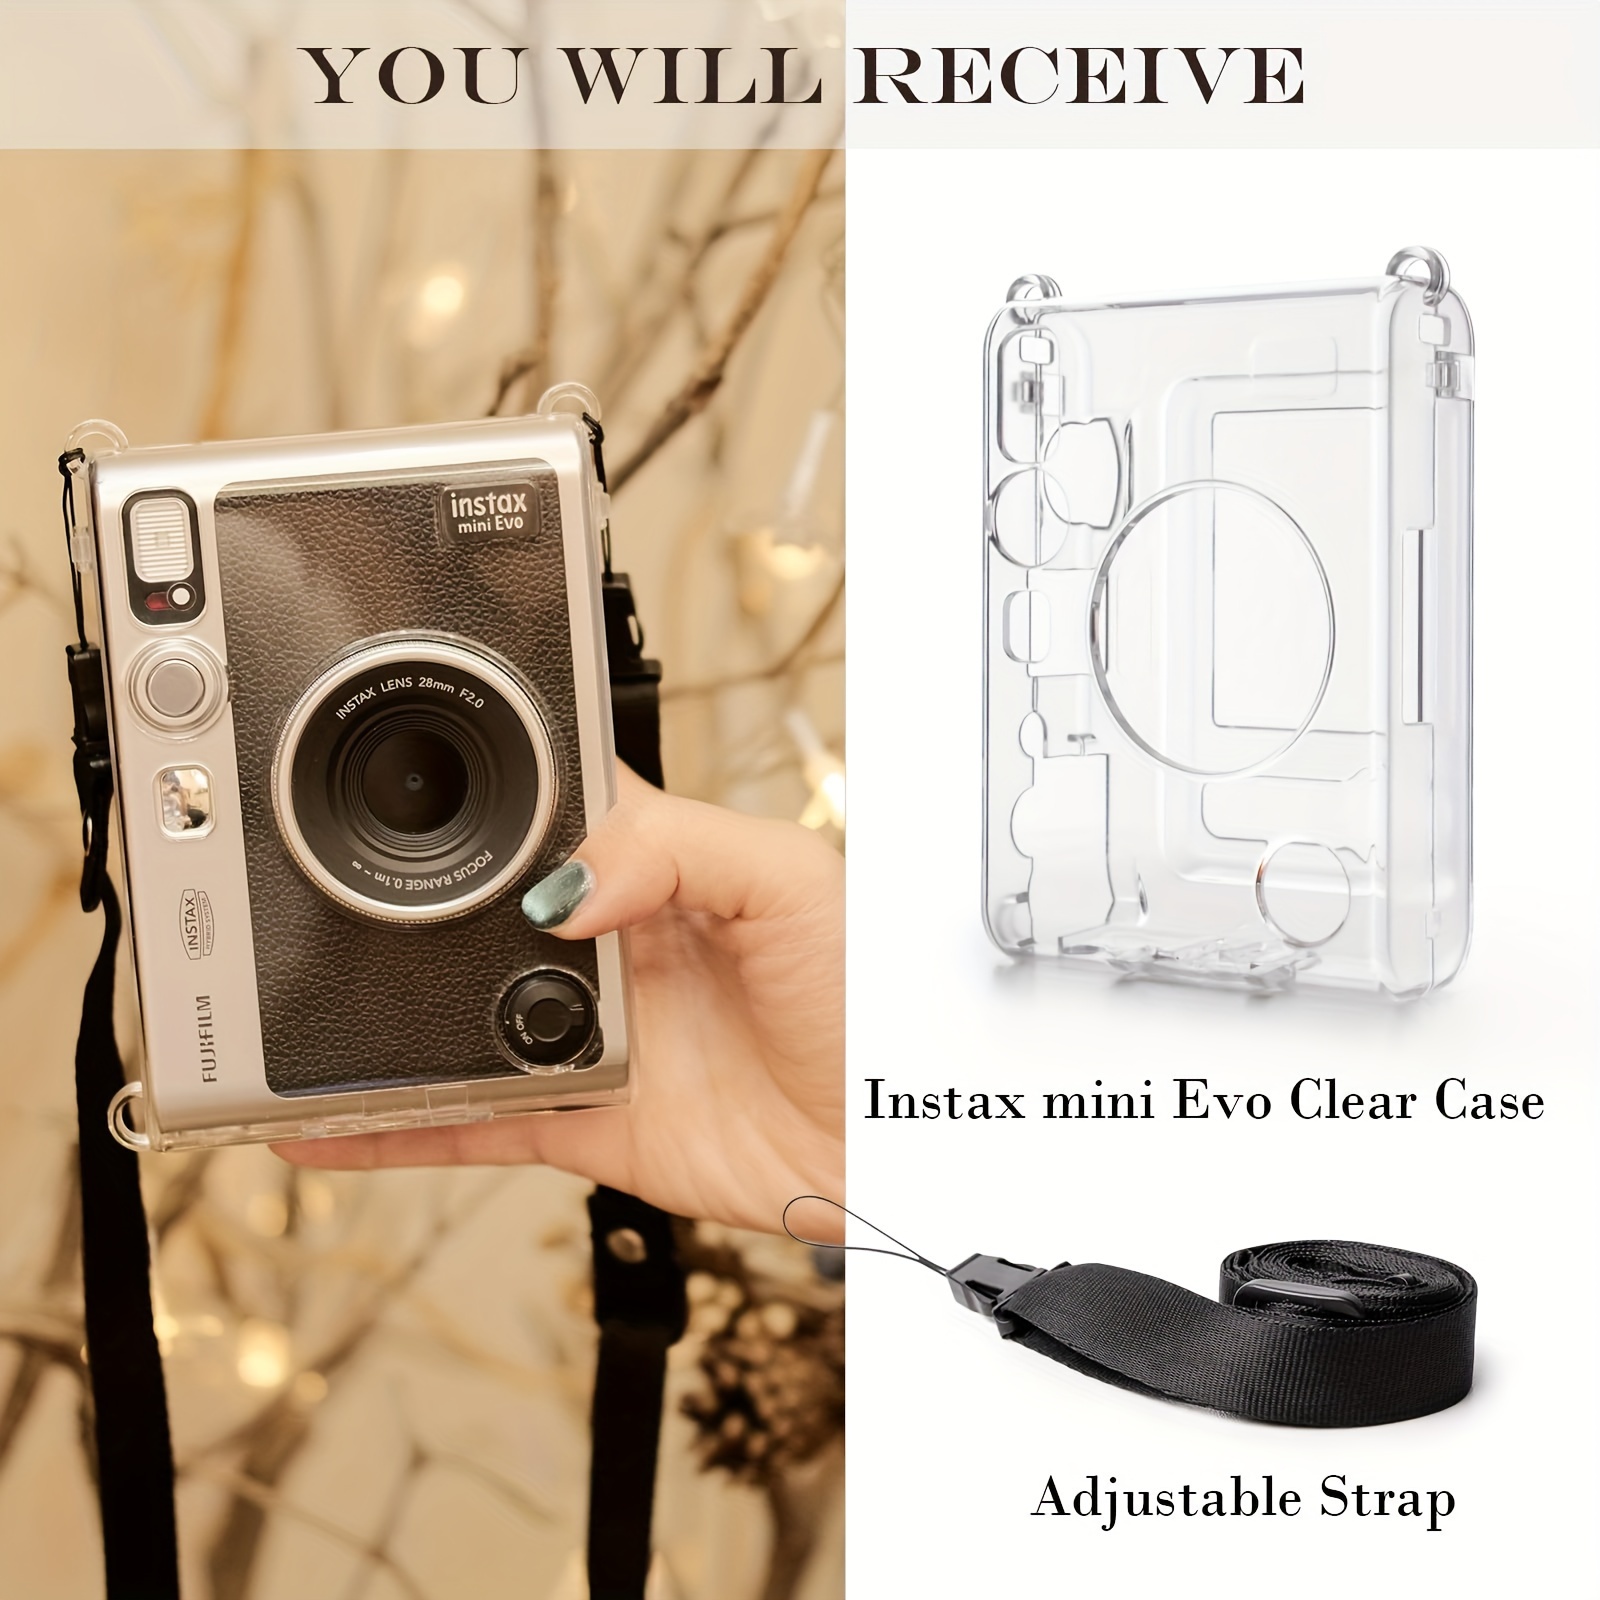 Mini Liplay Clear Plastic Hard Case Cover Protective Cover for